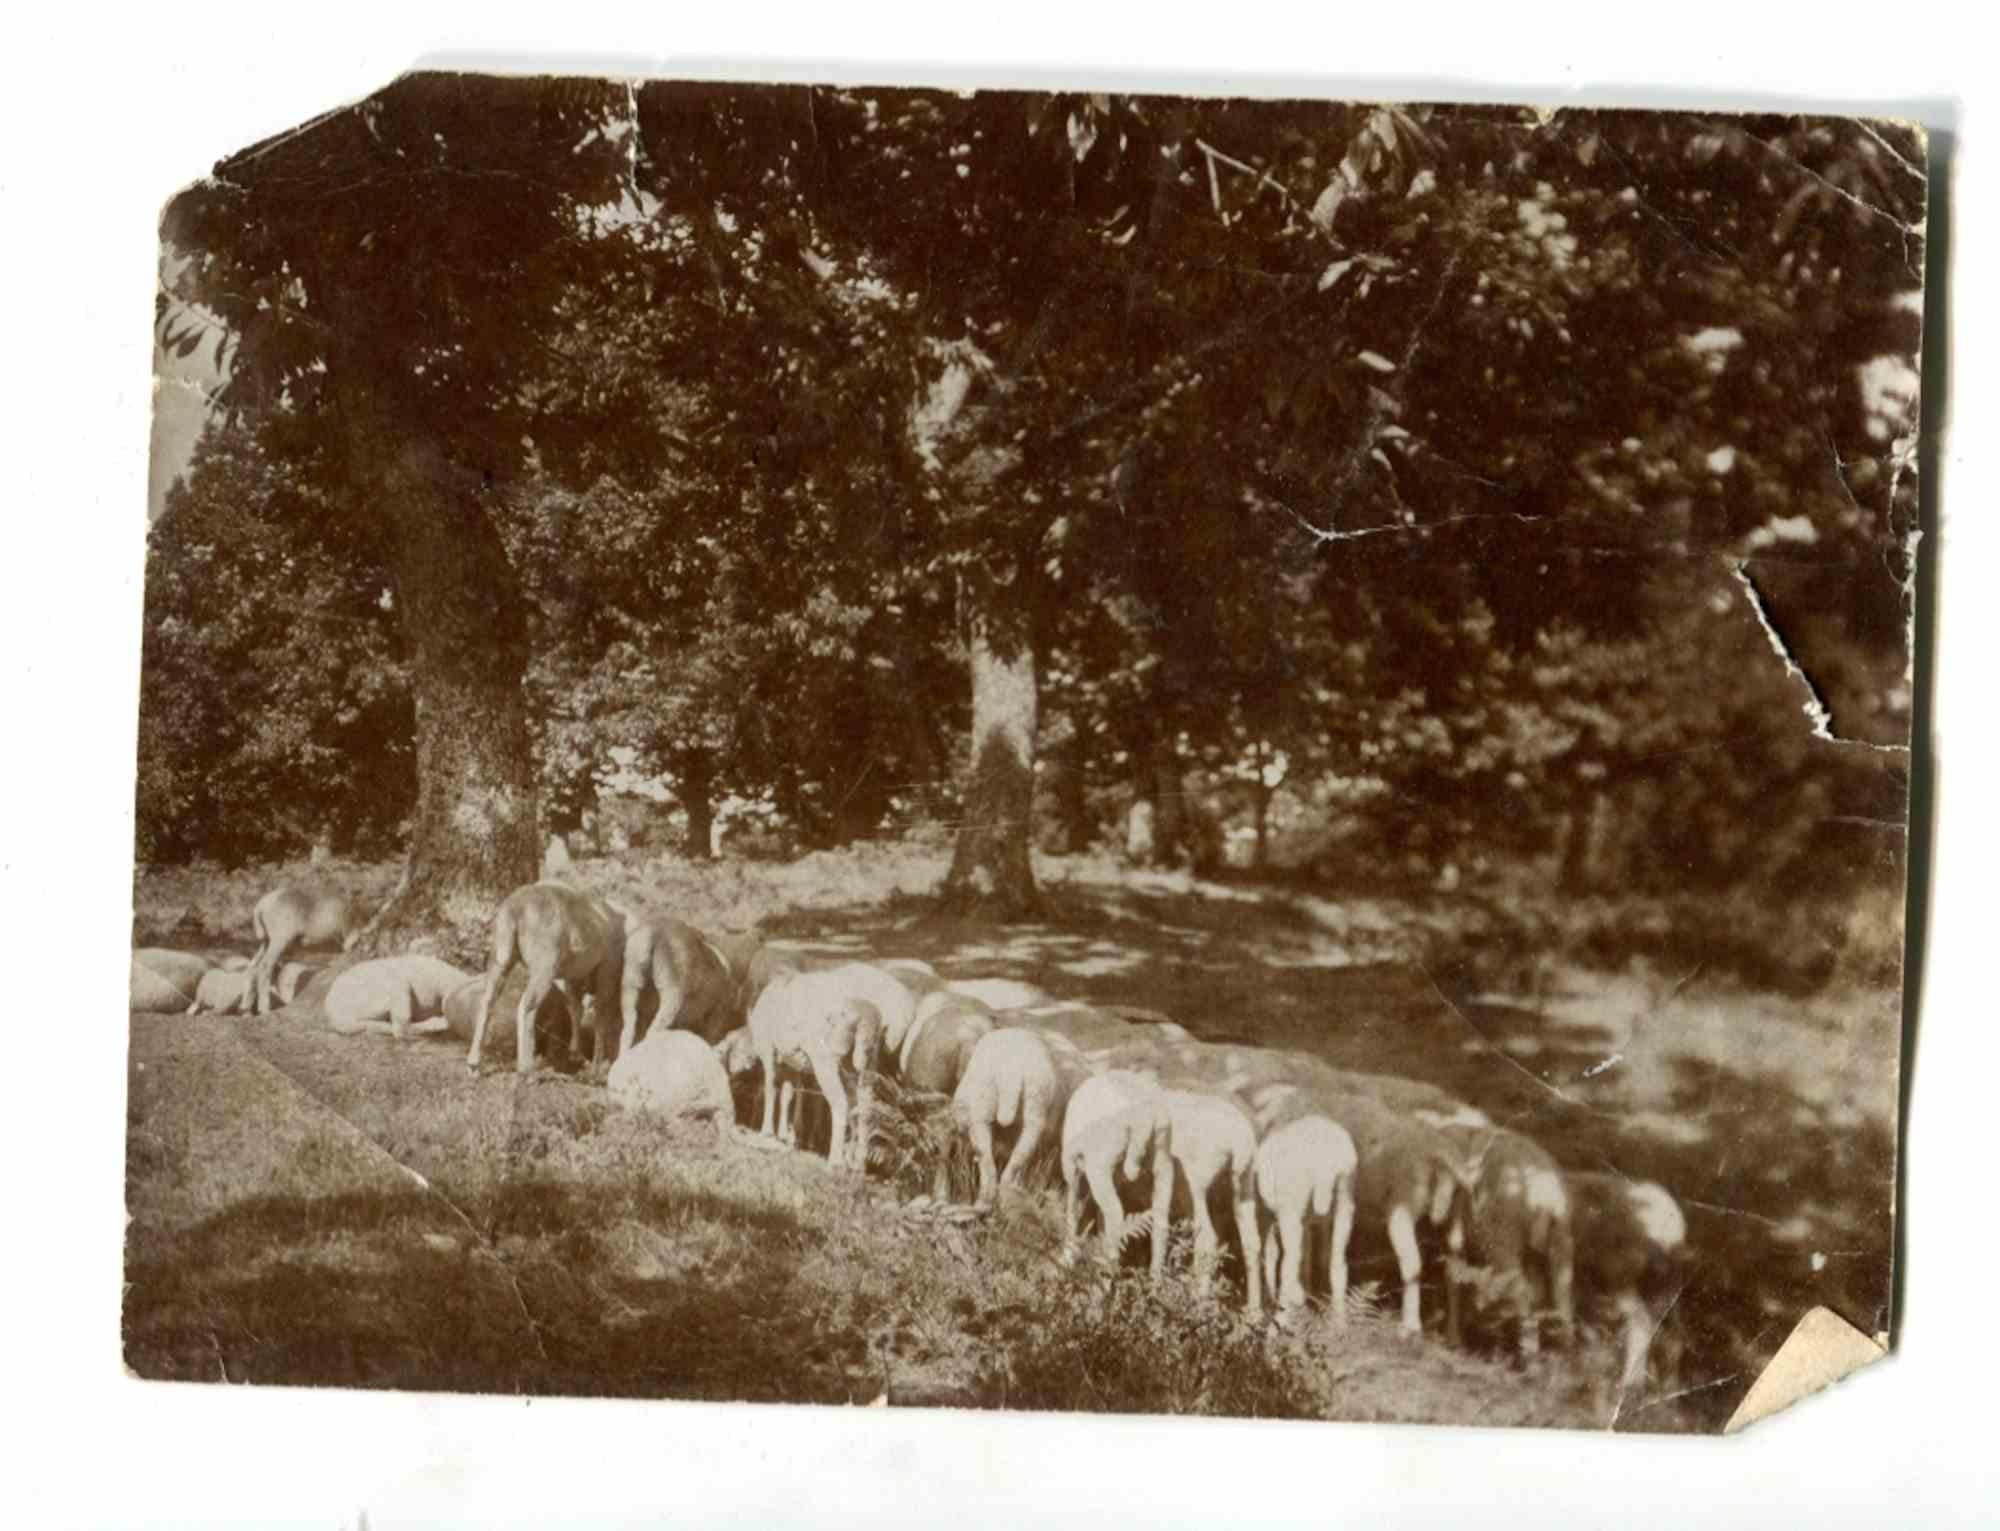 Unknown Figurative Photograph - The Old Days Photo - Animals - Vintage Photo - Early 20th Century 